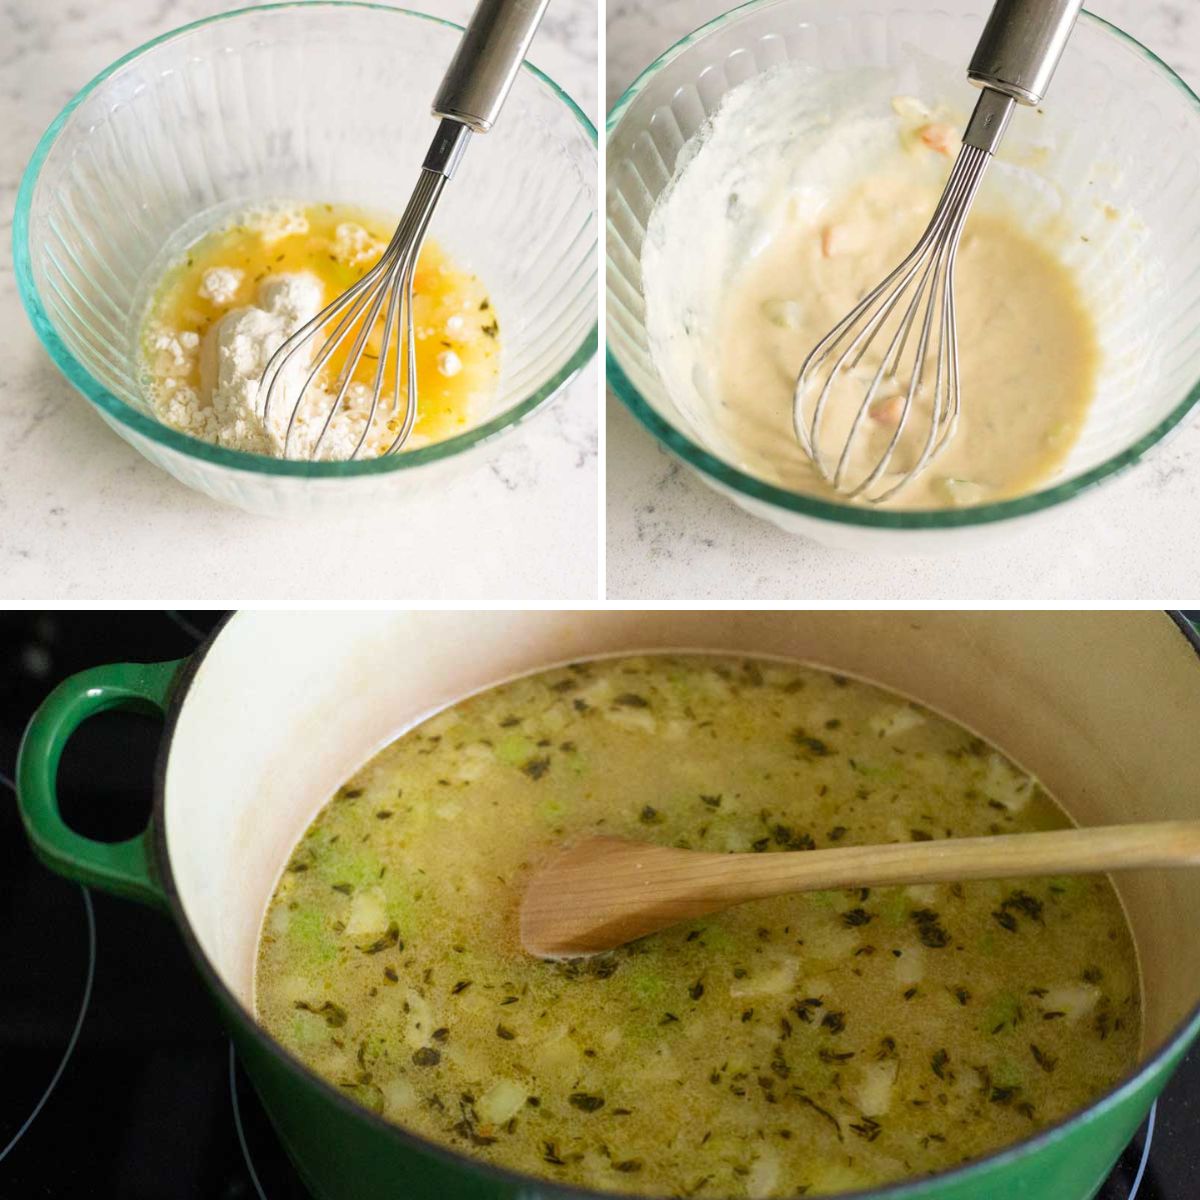 The step by step photos show how to thicken the broth with flour.